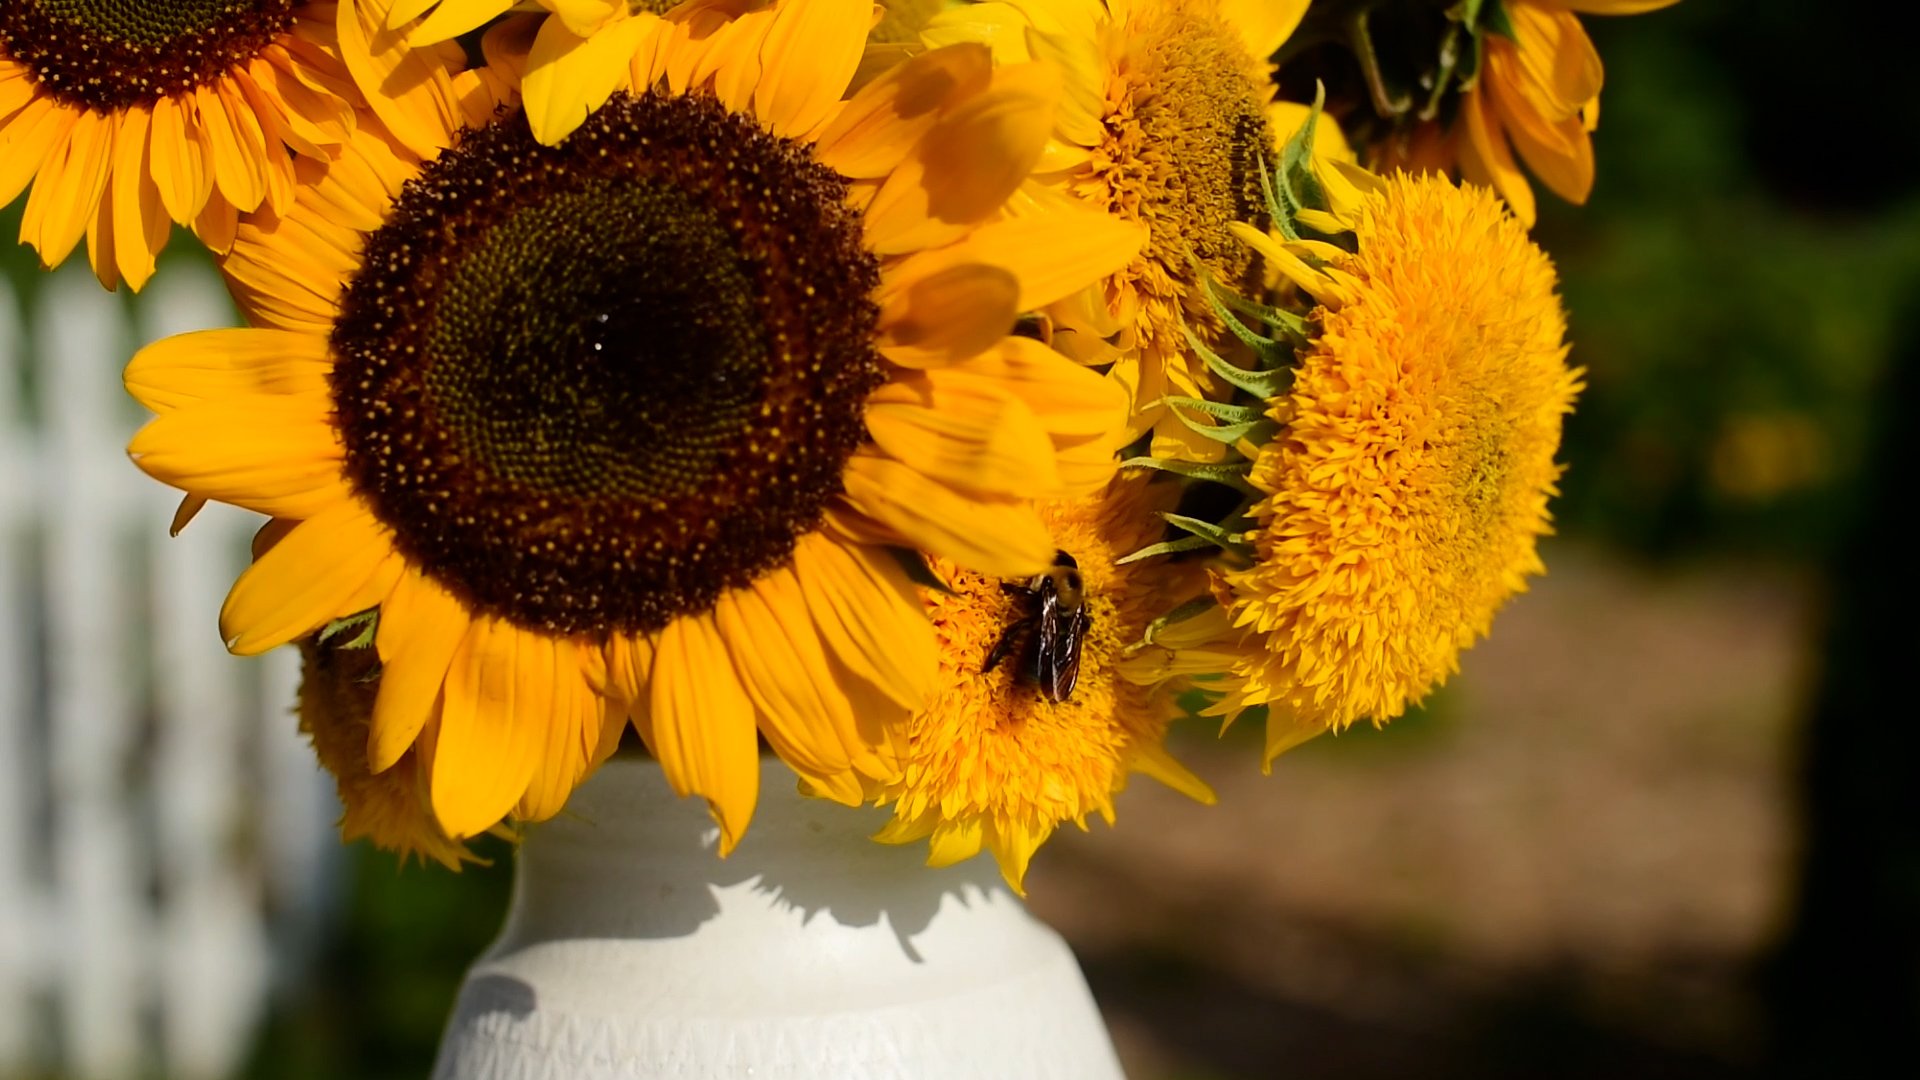 Sunflowers in Vase With Bee On them.jpg